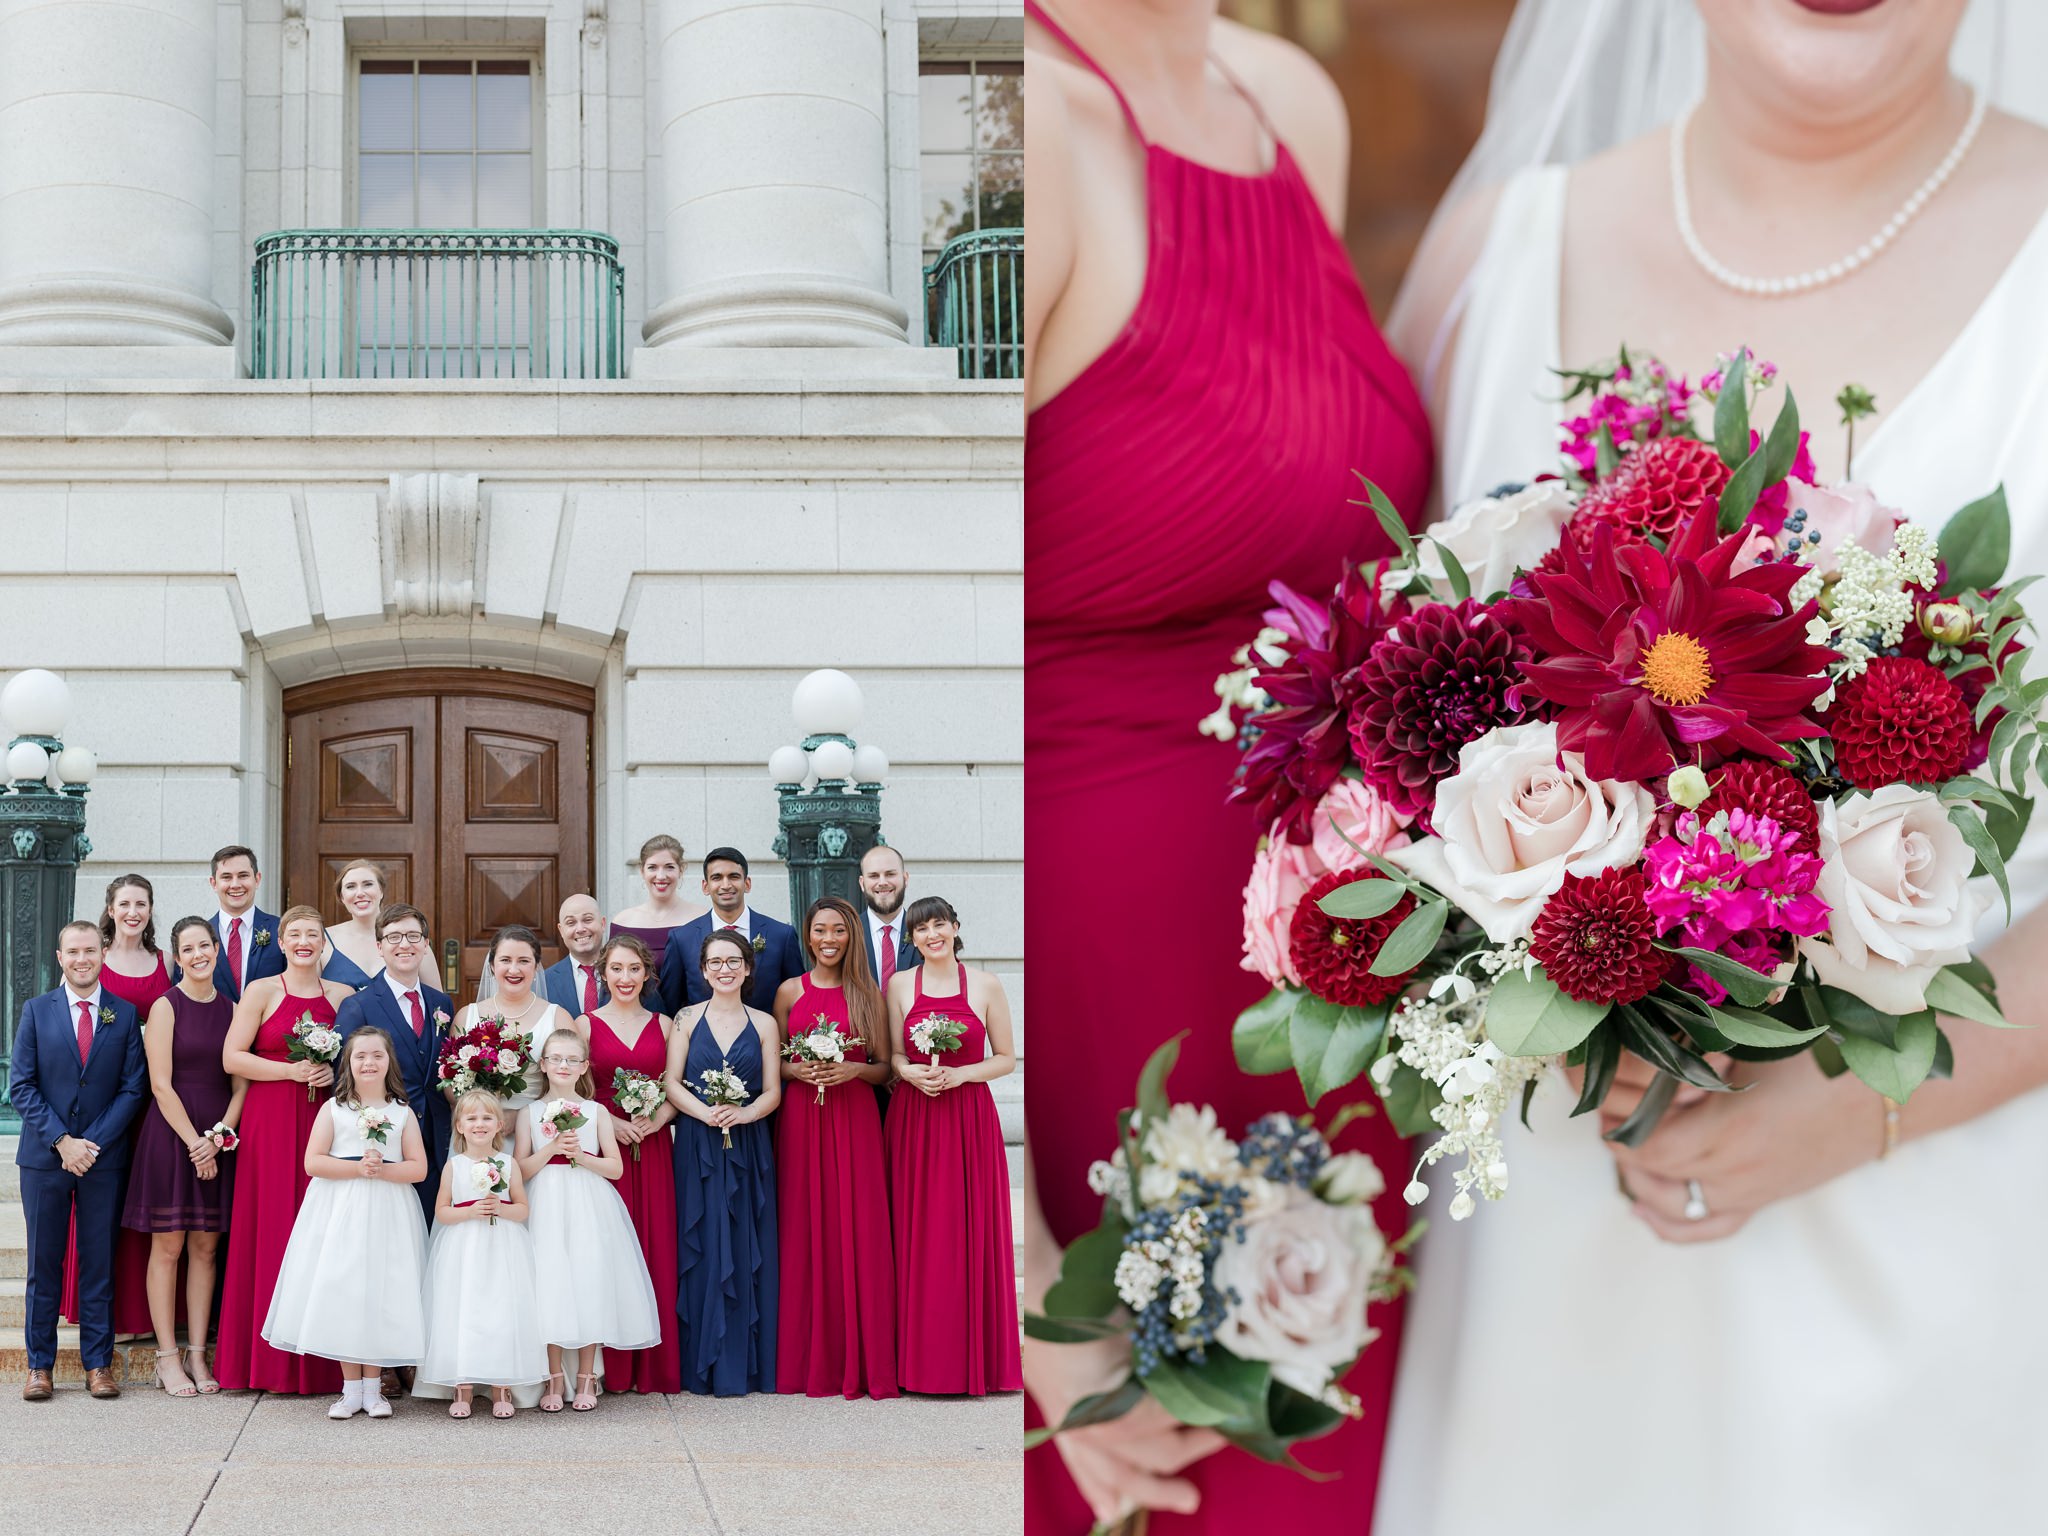 Ryan & Laura | A Downtown Wedding at The Madison Museum of Contemporary ...